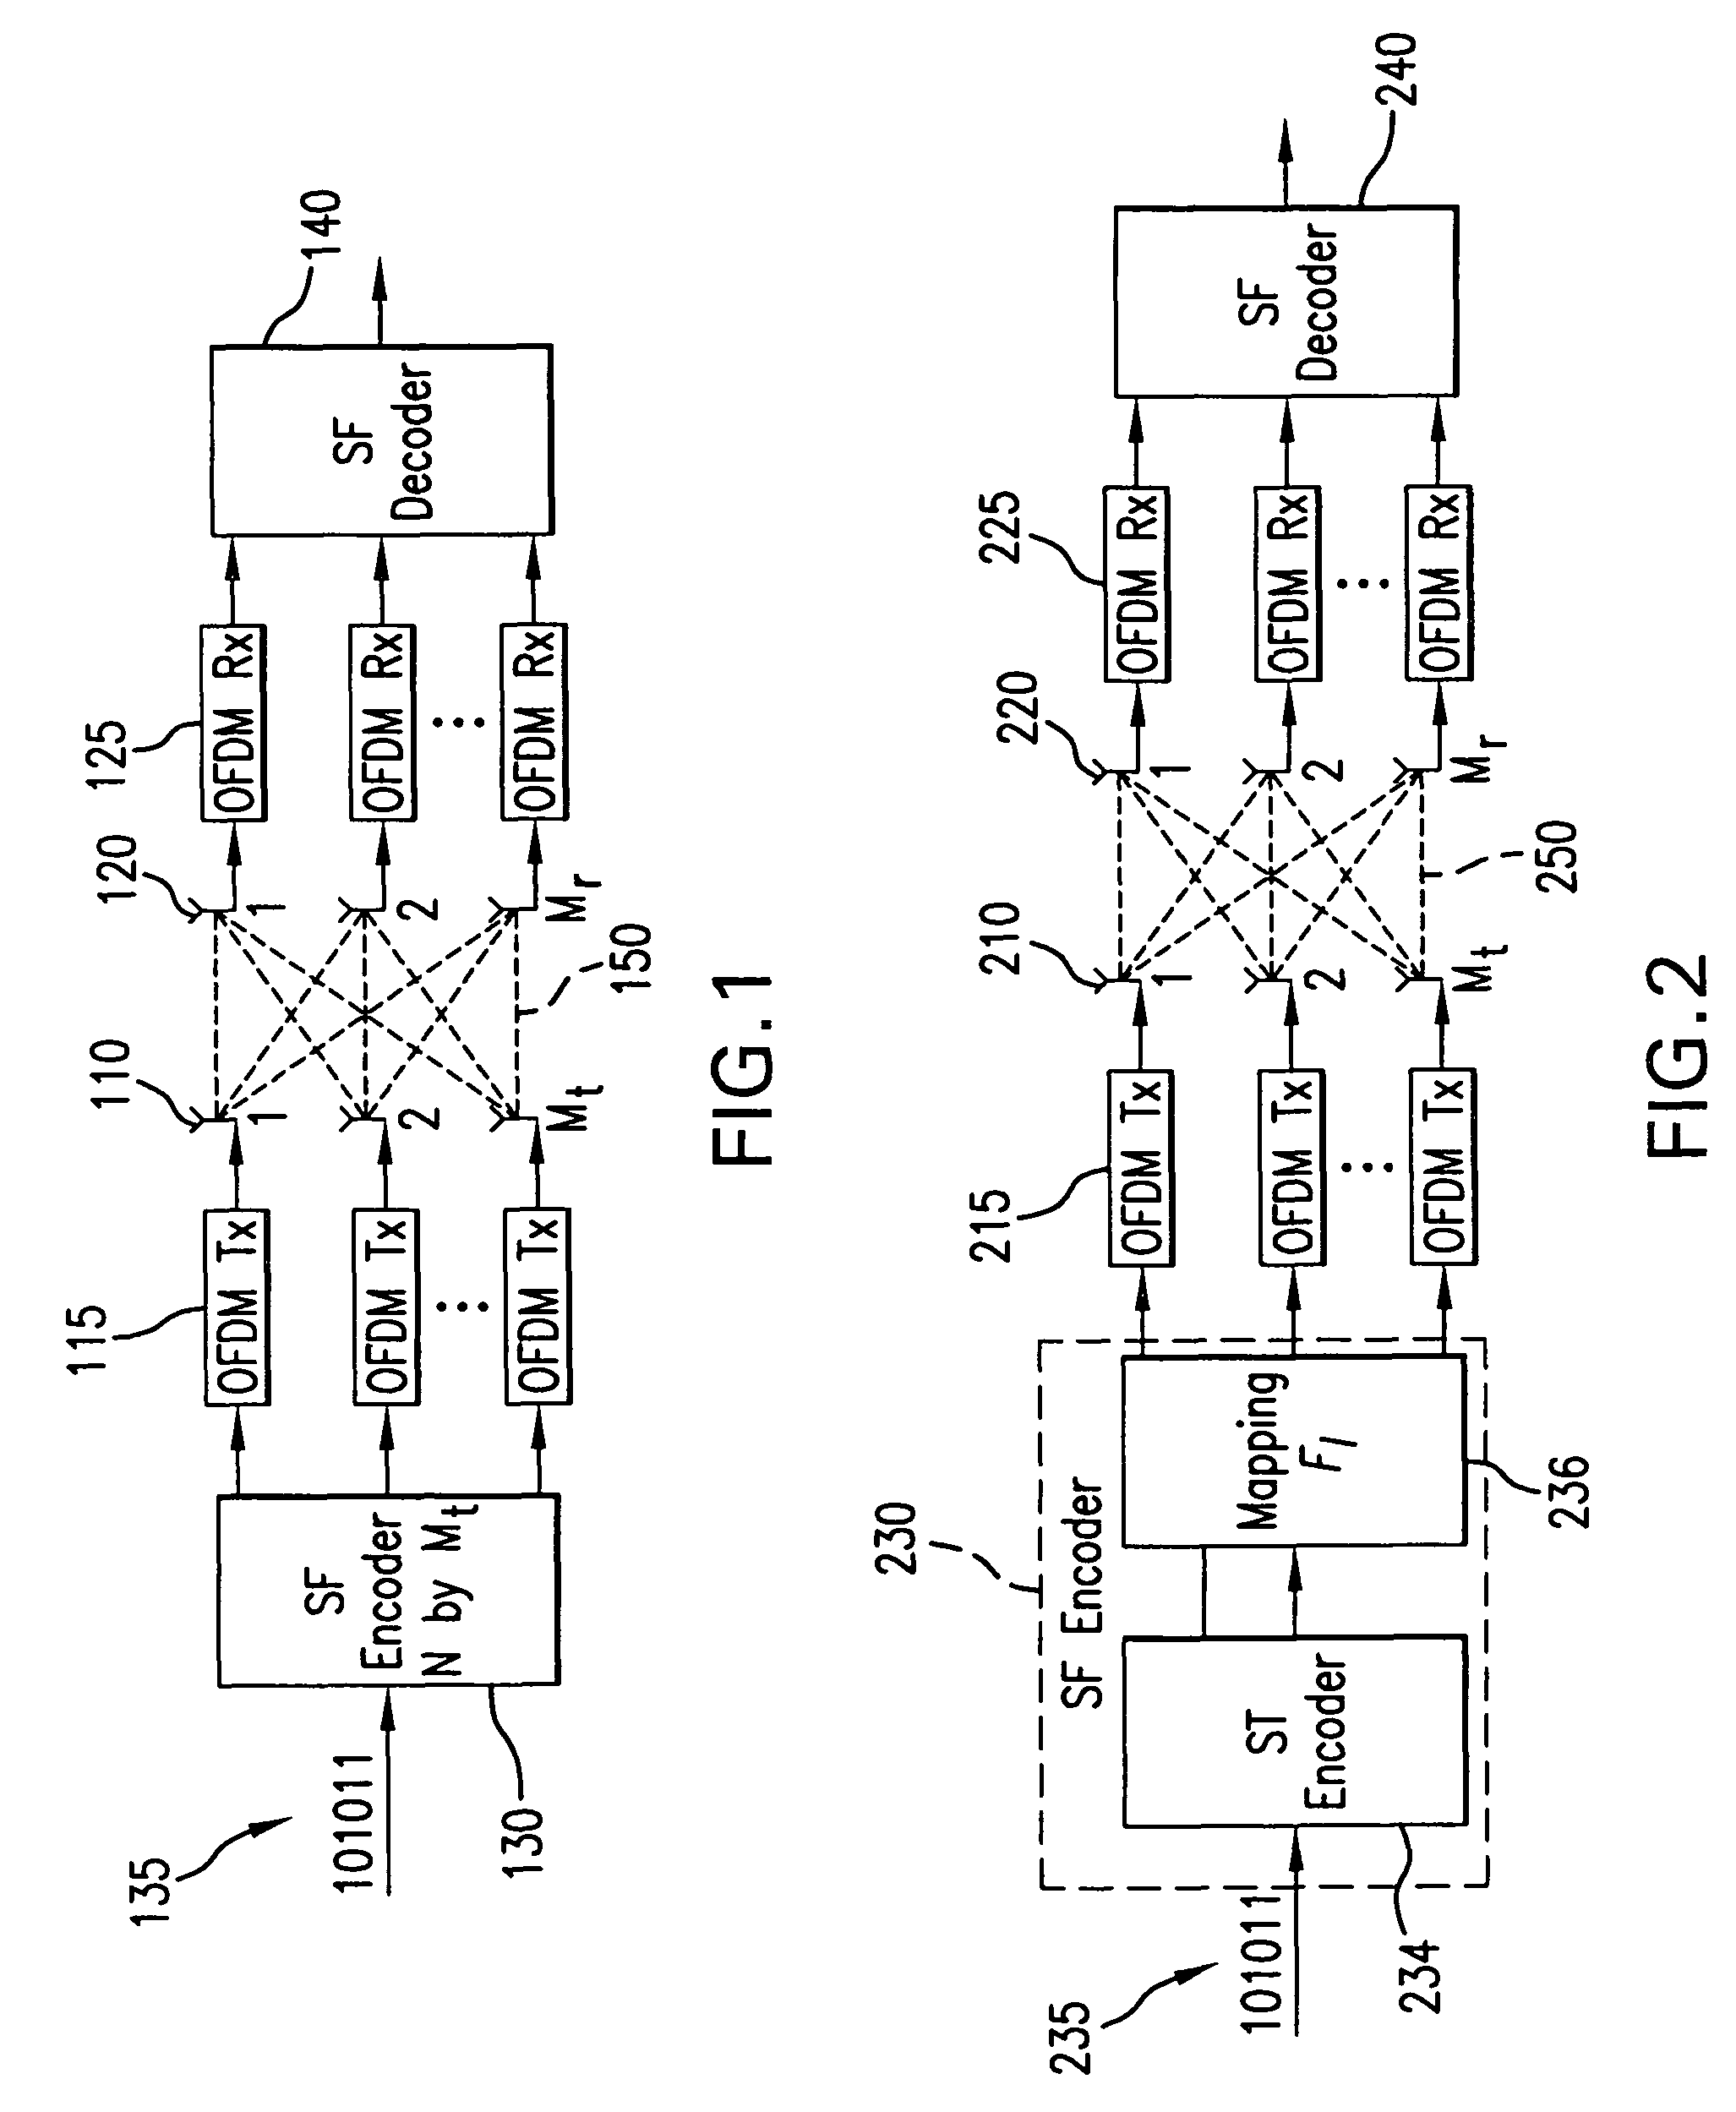 Systems and methods for coding in broadband wireless communication systems to achieve maximum diversity in space, time and frequency